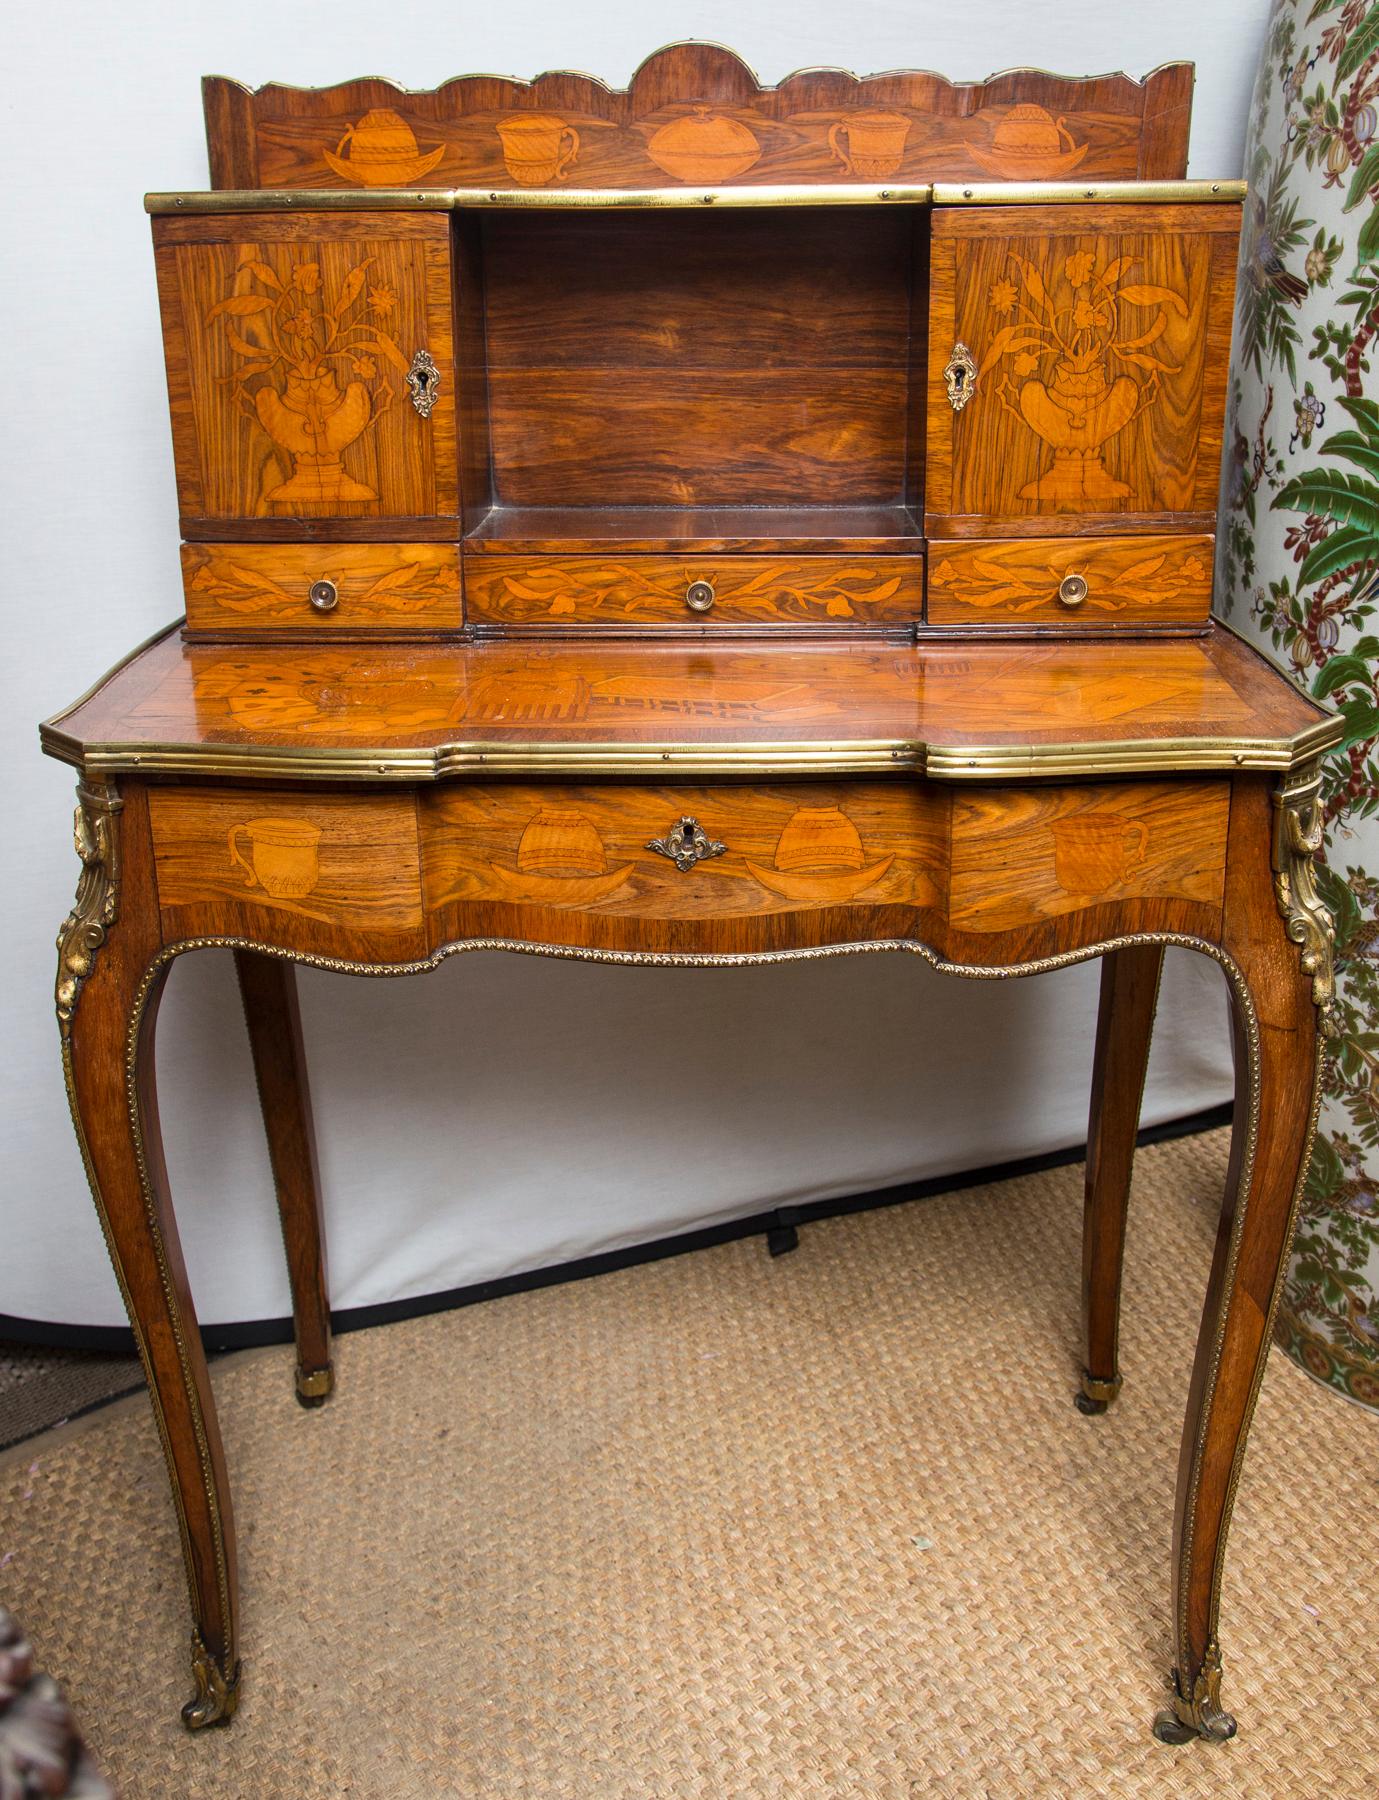 A beautiful bon heur de jour with inlays in the manner of Charles Topino. Made in two parts. 
Gilt bronze mounts. Secret buttons. within the small cabinet doors, to unlock the 2 side small drawers. Cabriole legs ending in original (?) casters. Of